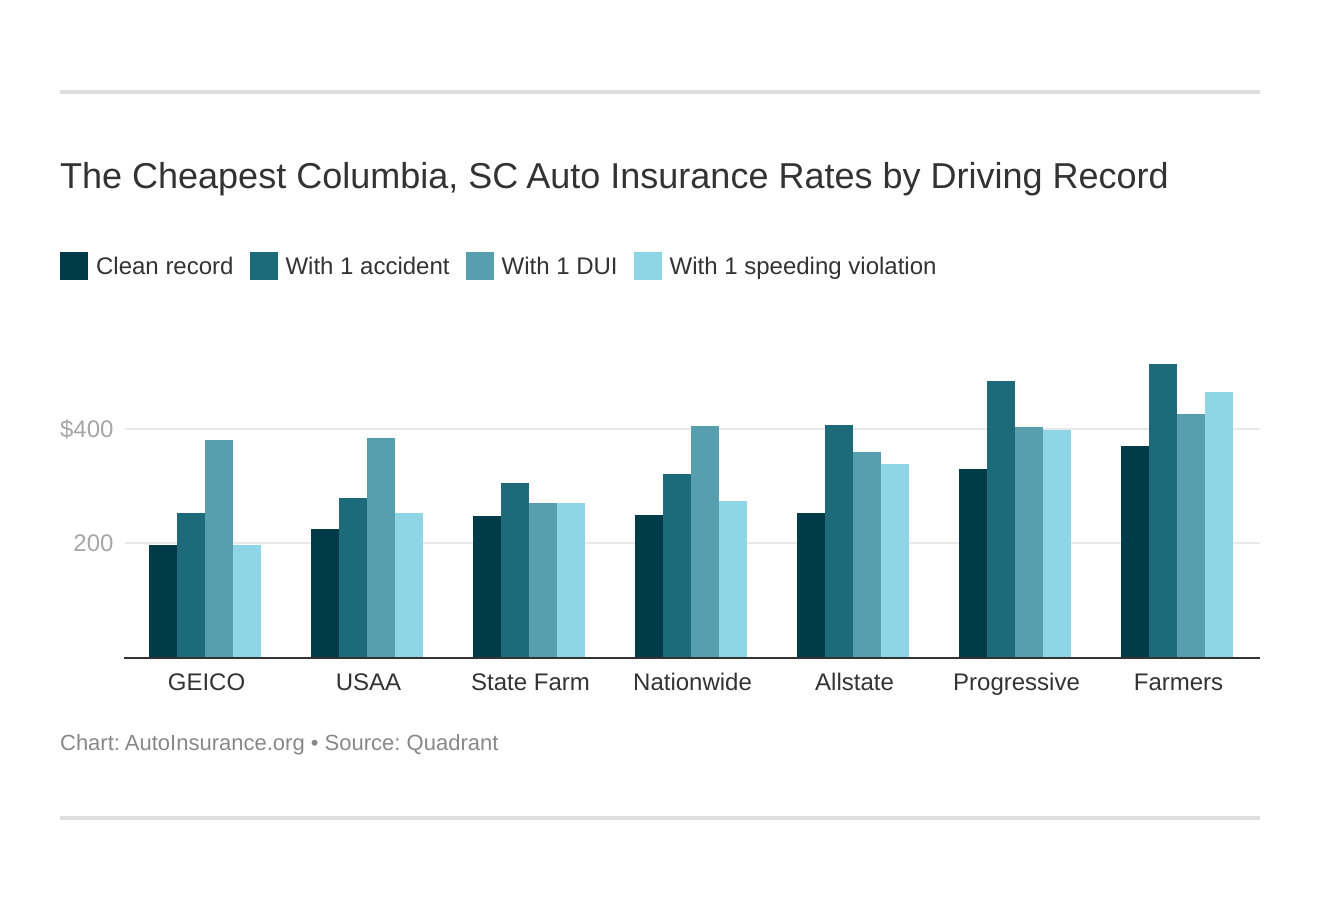 The Cheapest Columbia, SC Auto Insurance Rates by Driving Record